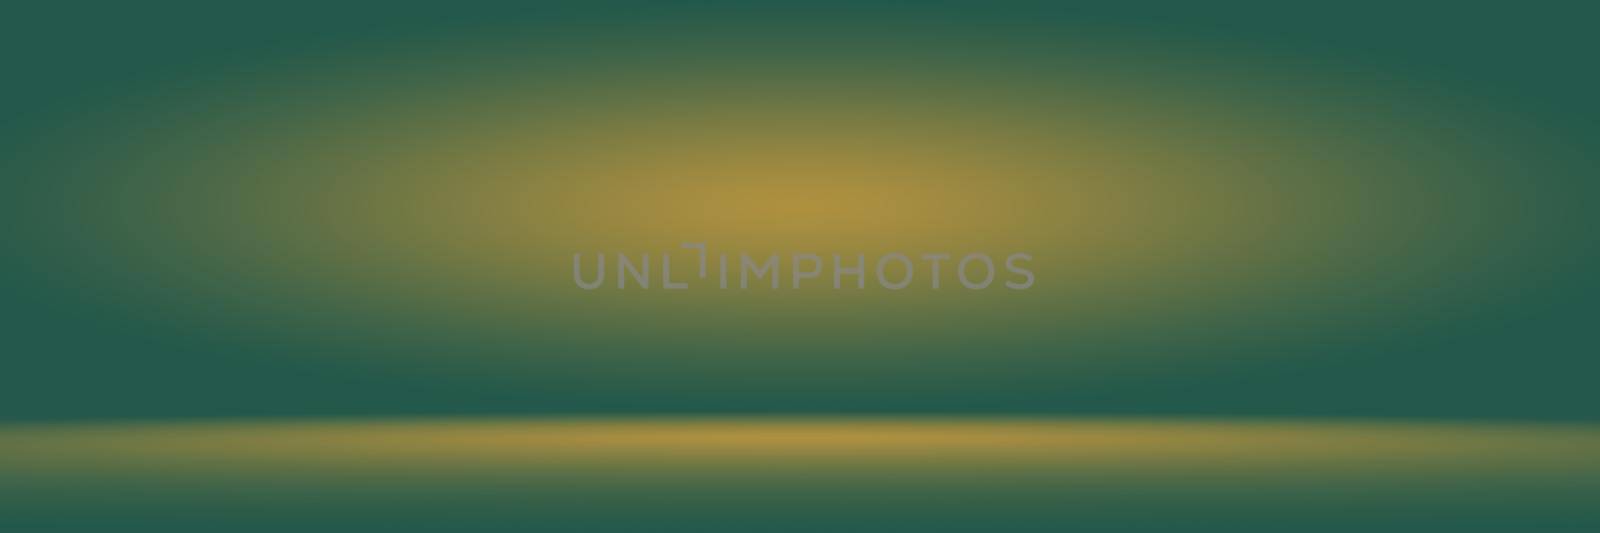 green and light green blur gradient background by Benzoix